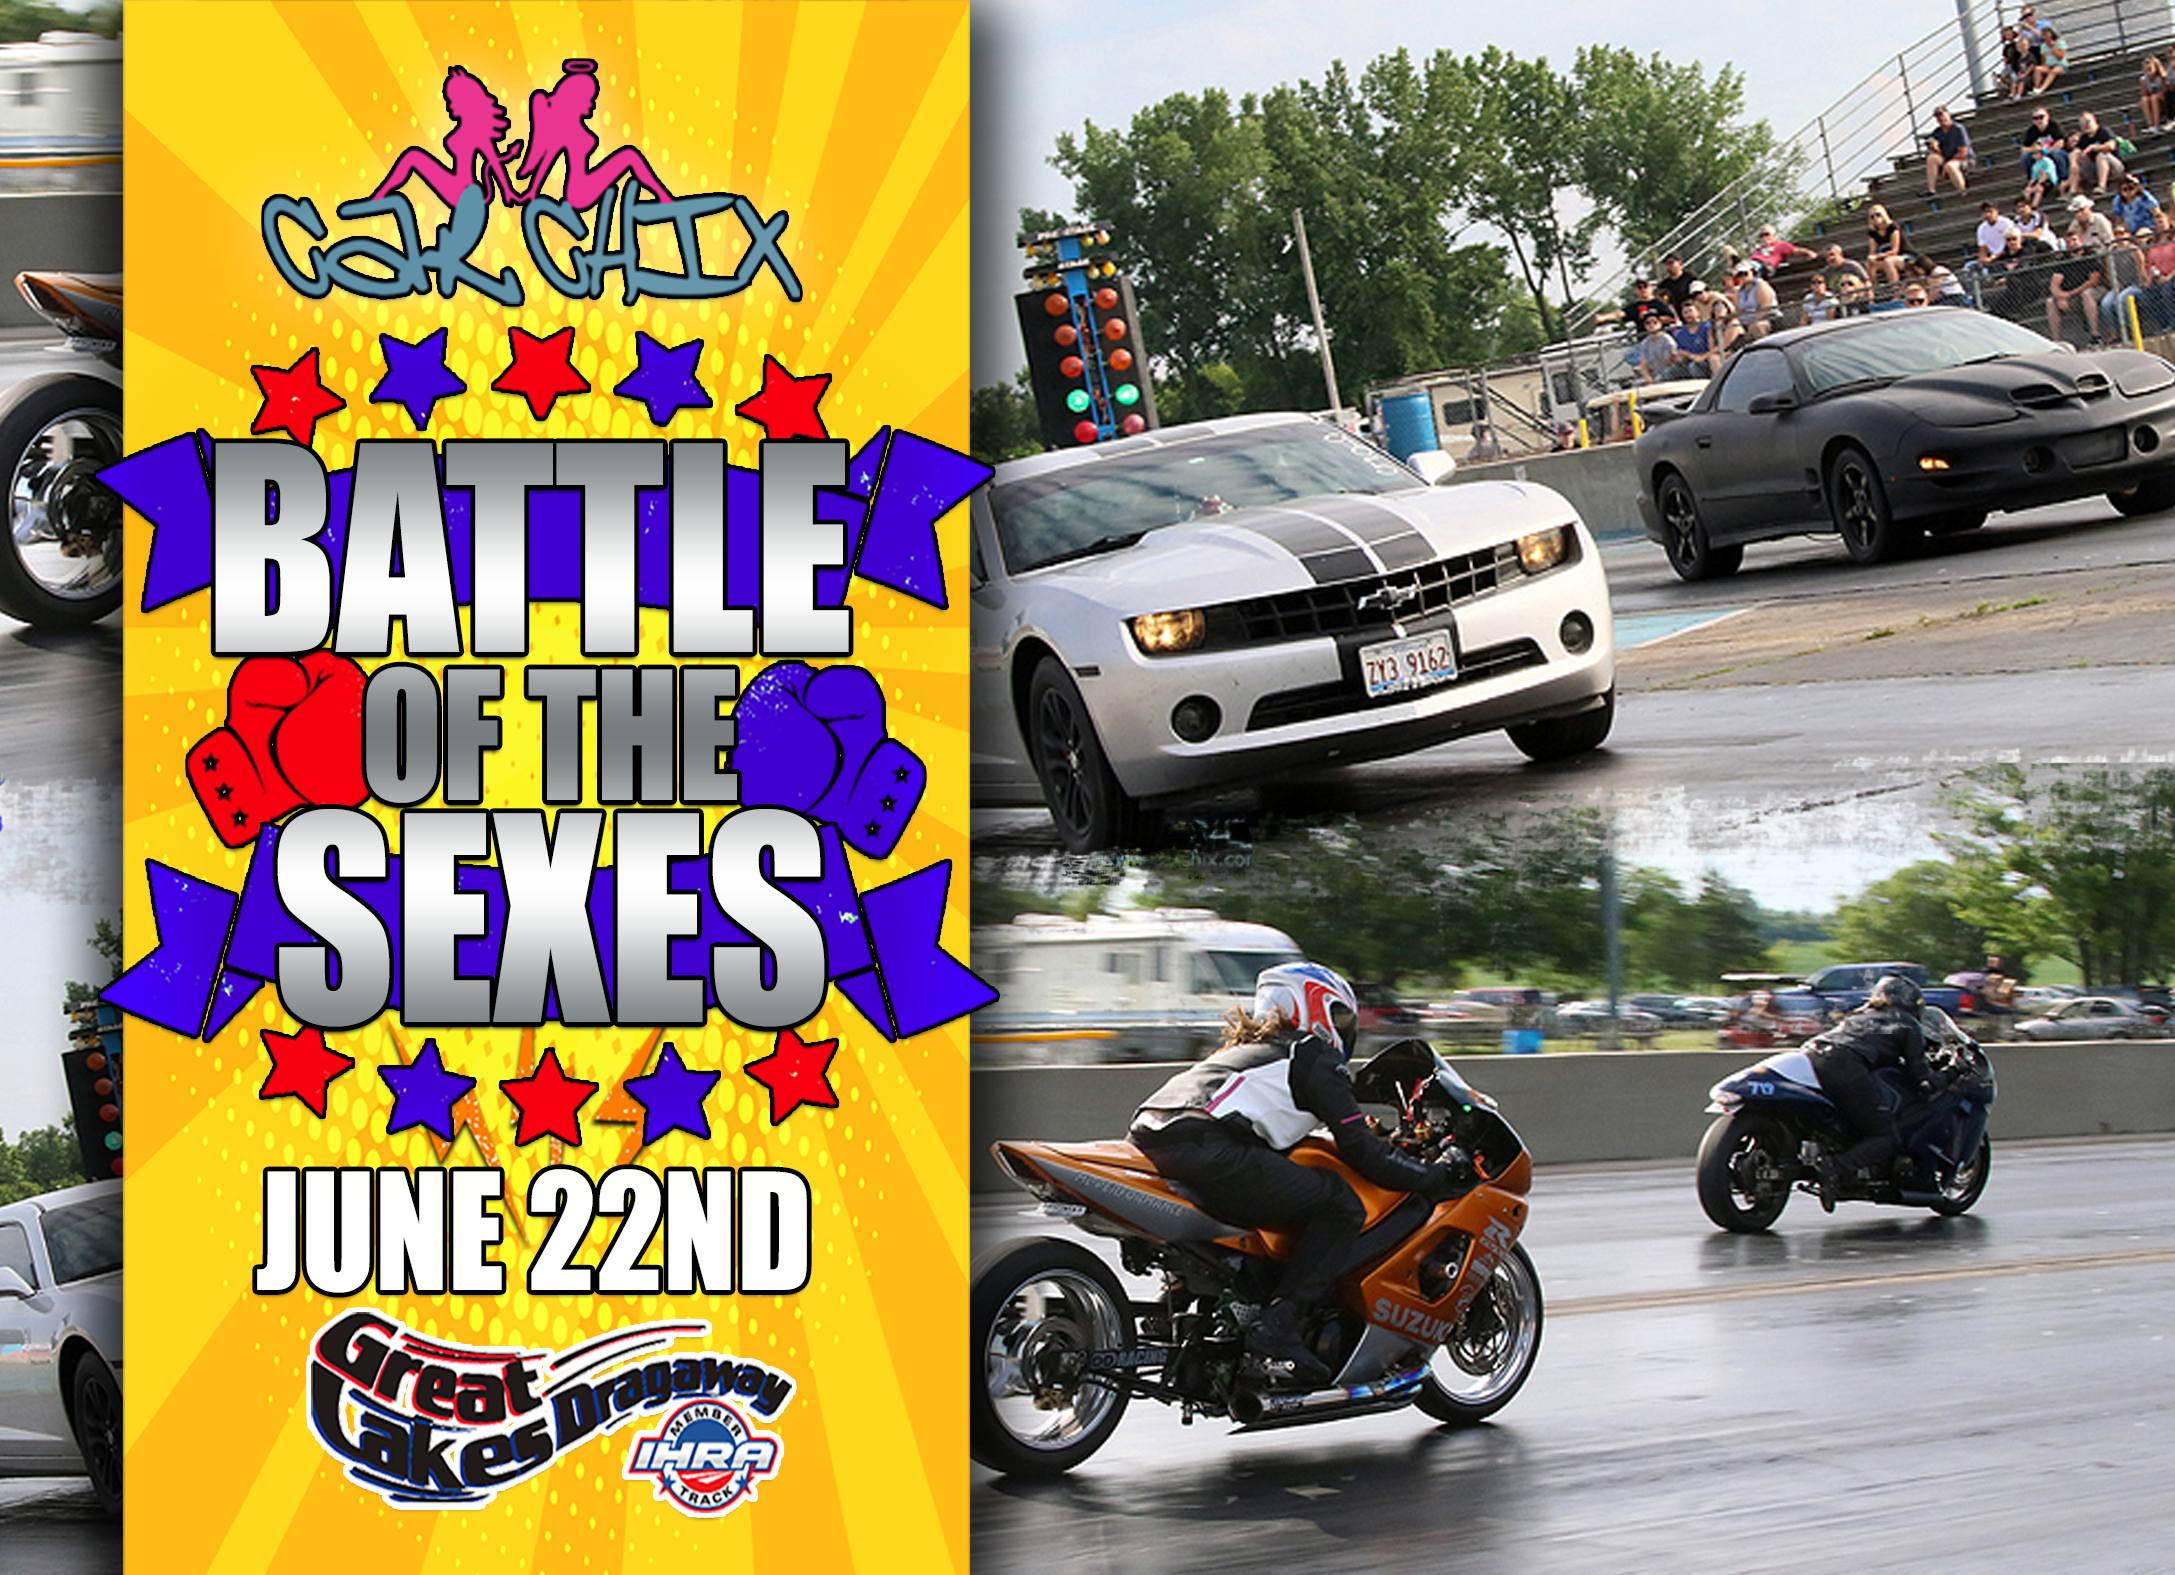 car chix- carchicks-battle of the sexes-great lakes dragaway-ladies only-ladies only drag races-women racing-female racers